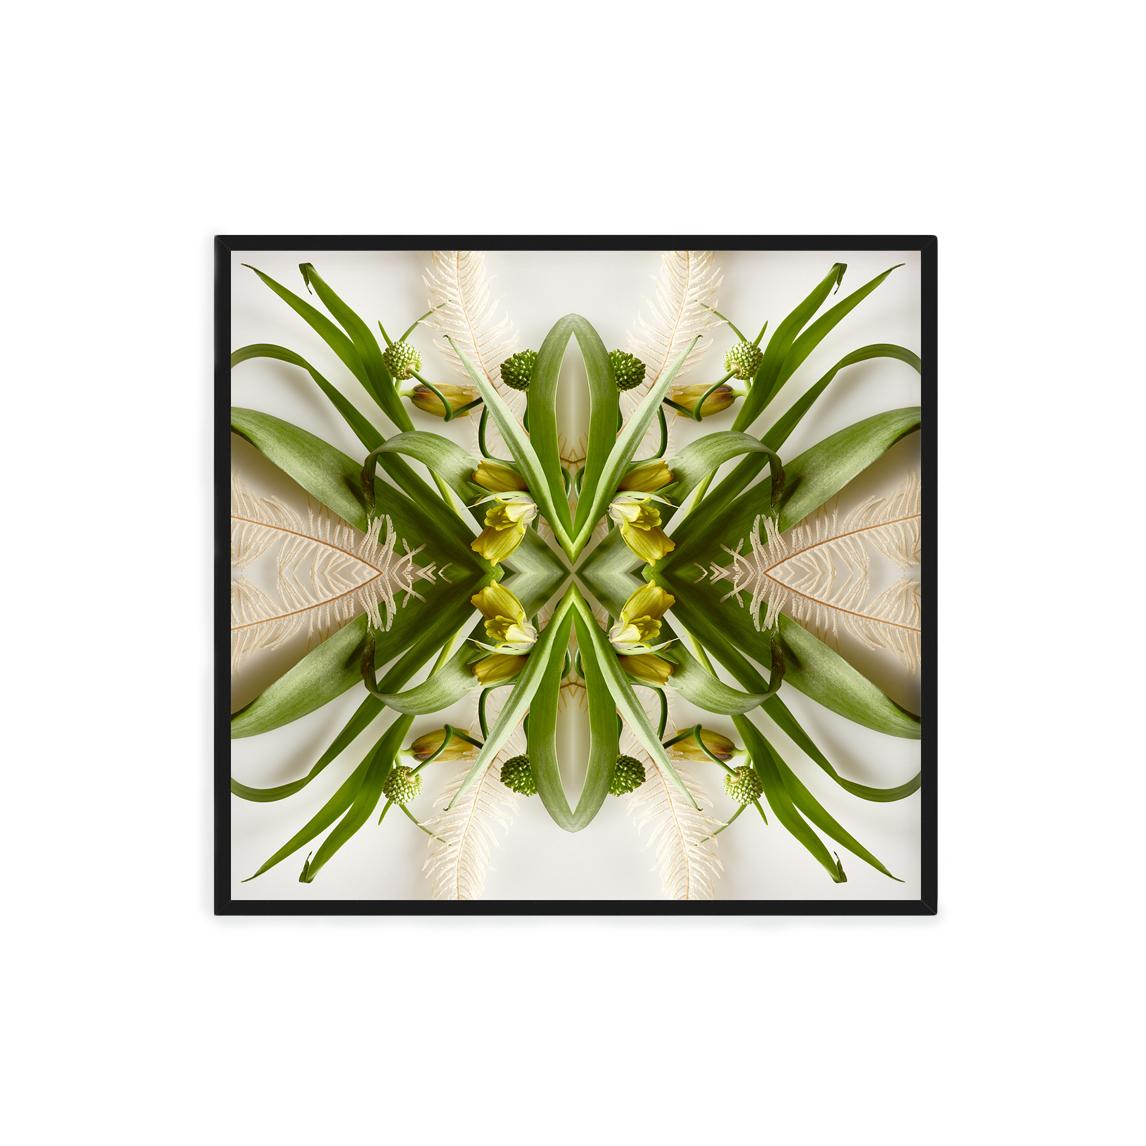 This print features the playful relationship between natural forms and botanicals. In this image Erin uses the natural composition of the yellow and green fritillary, and her own collage work, to create a hypnotic mandala with the floral. Some